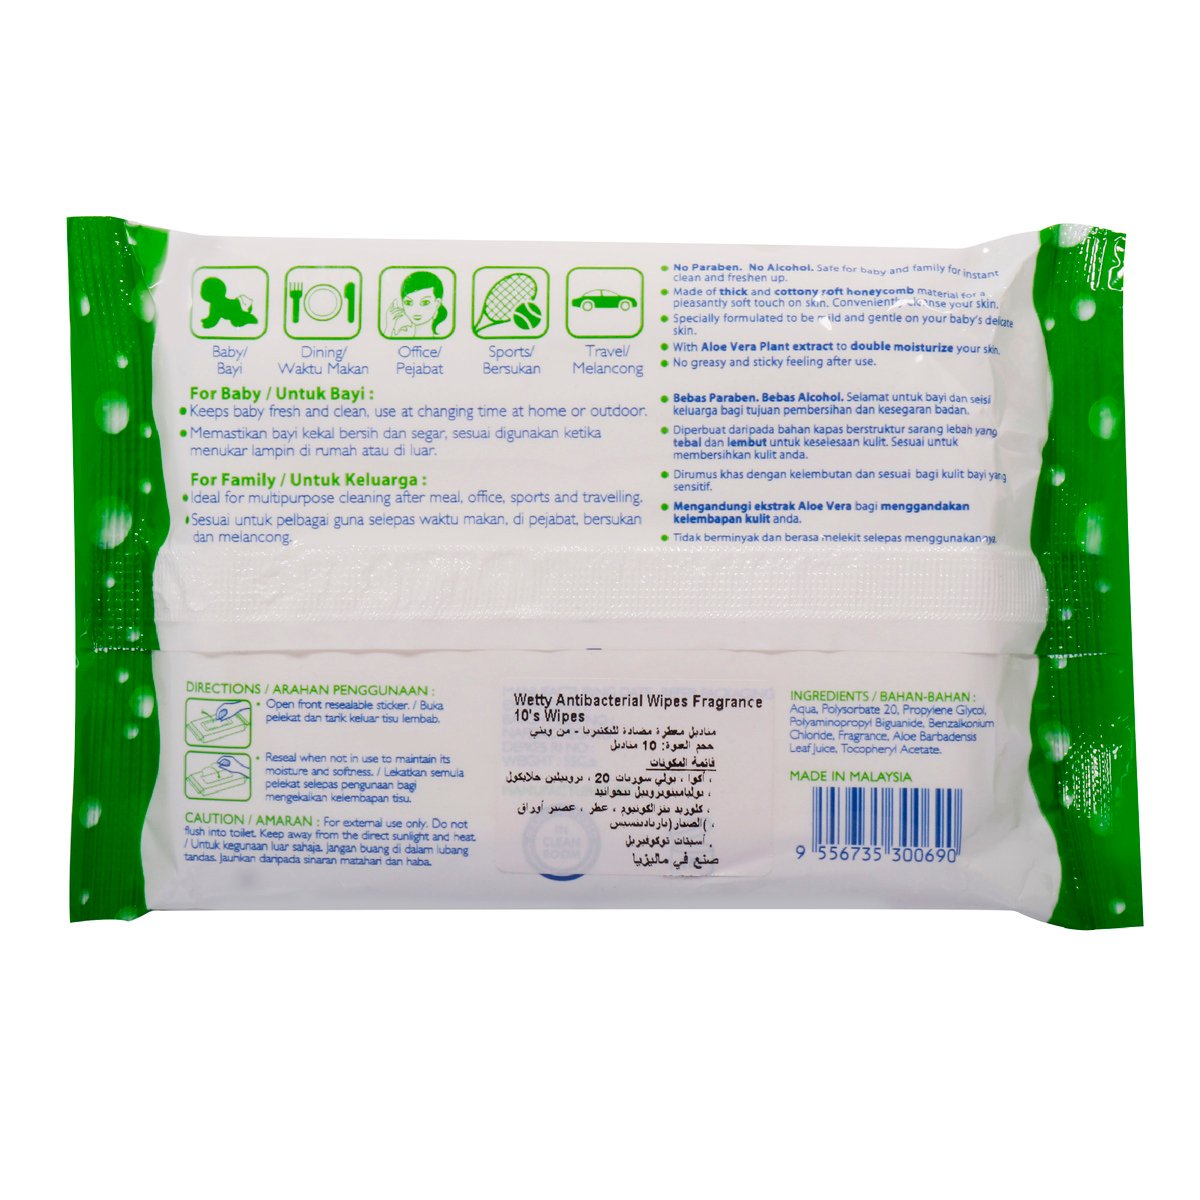 Wetty Anti-Bacterial Wipes With Fragrance 10pcs